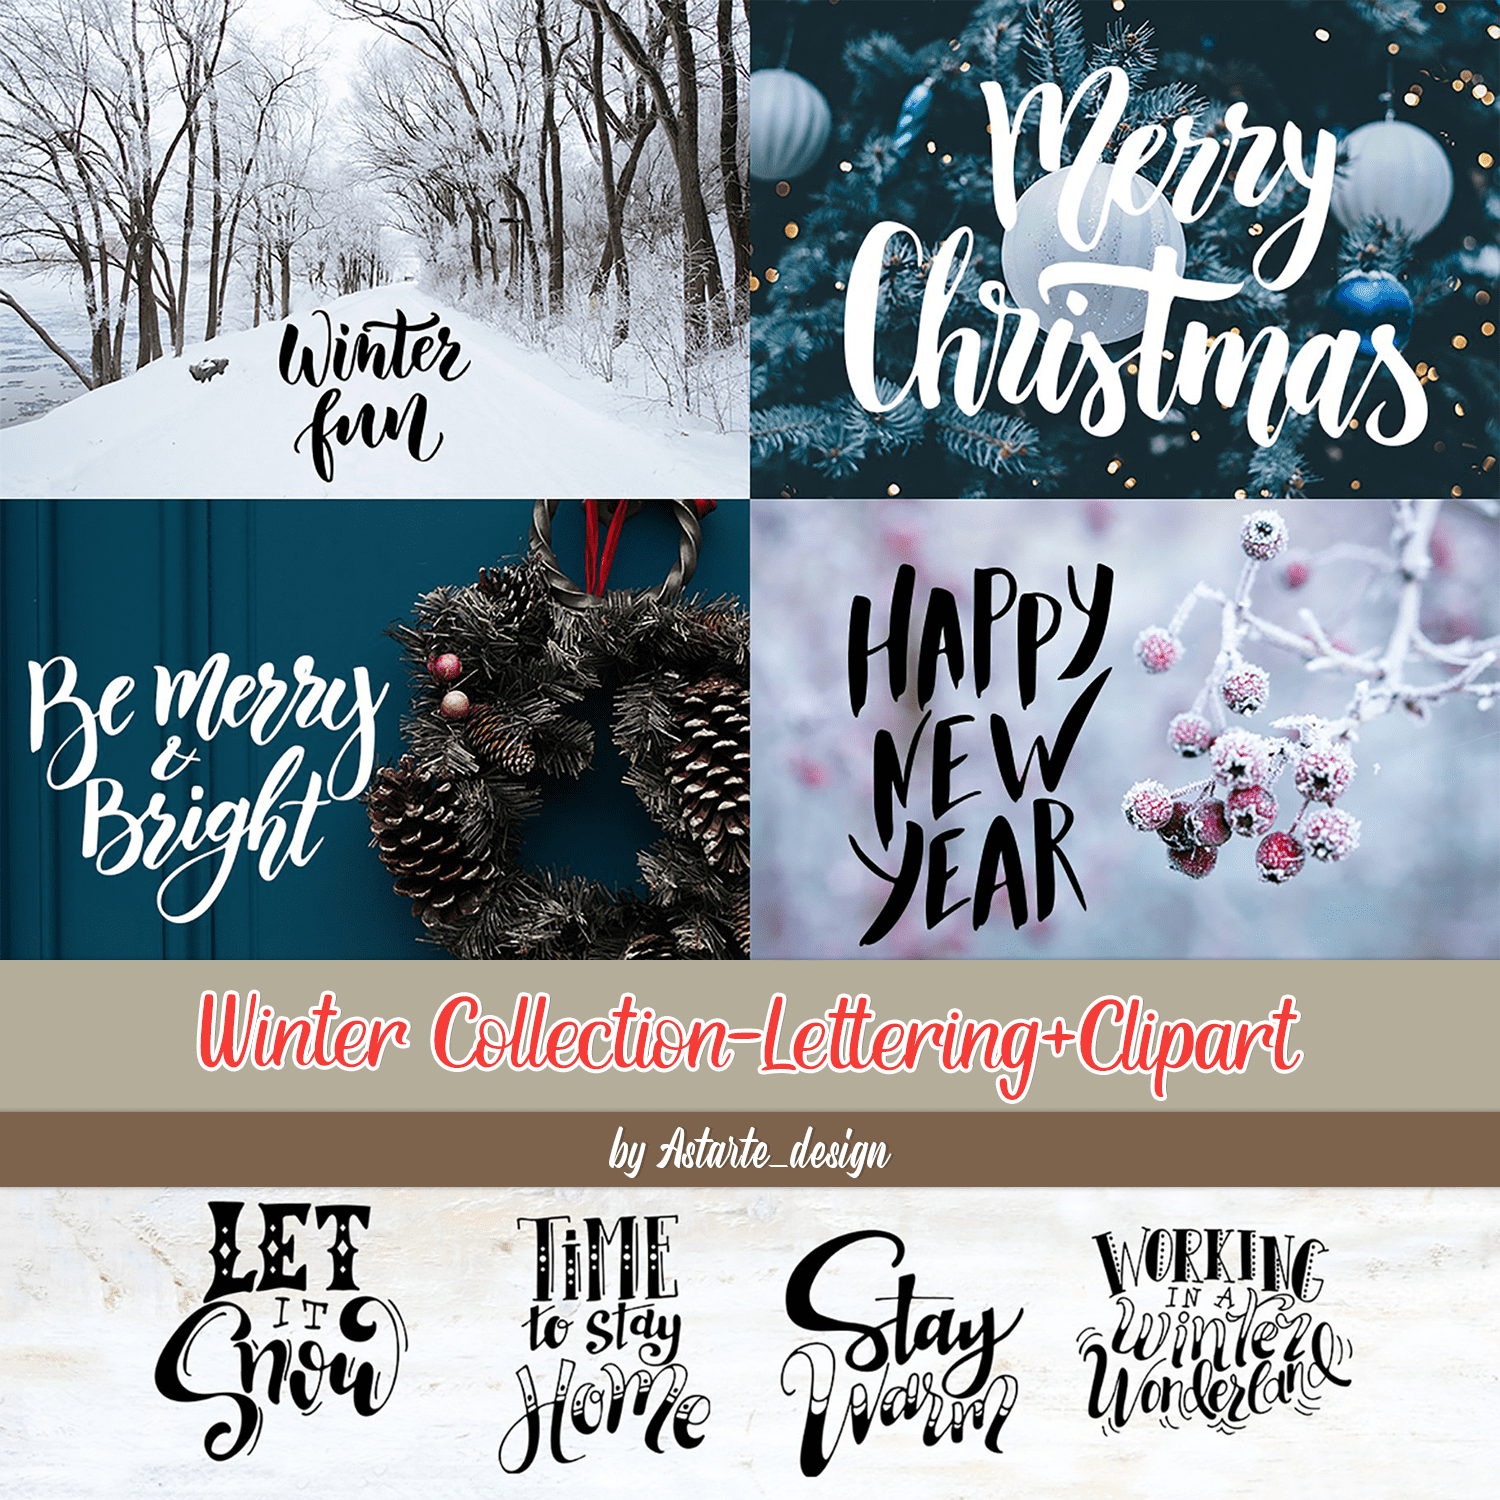 Winter Collection-Lettering+Clipart cover.